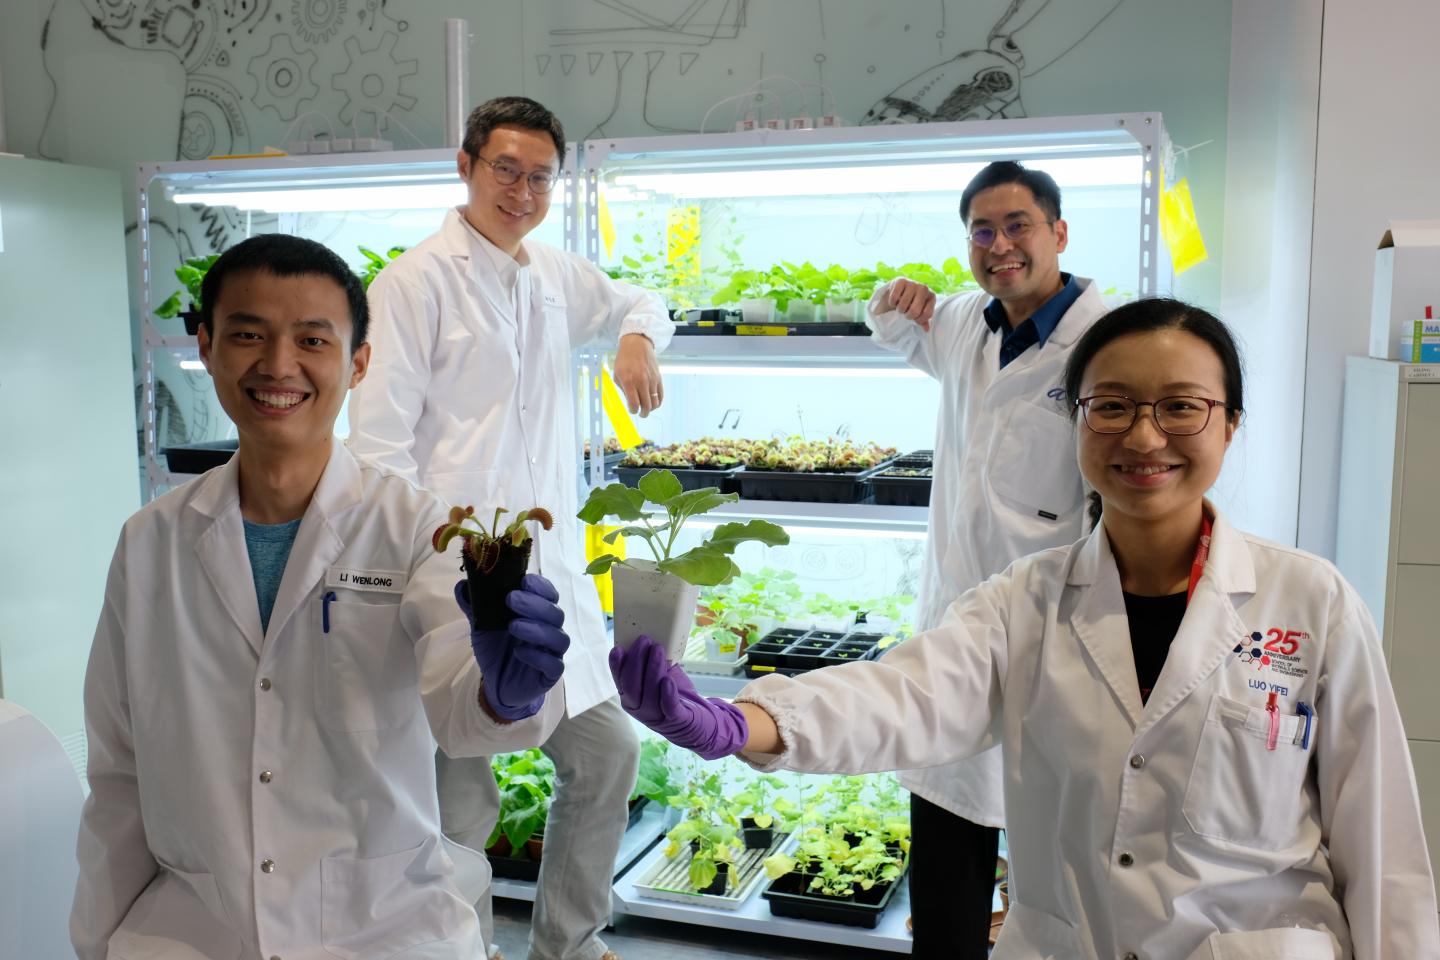 NTU Singapore scientists develop device to 'communicate' with plants using electrical signals